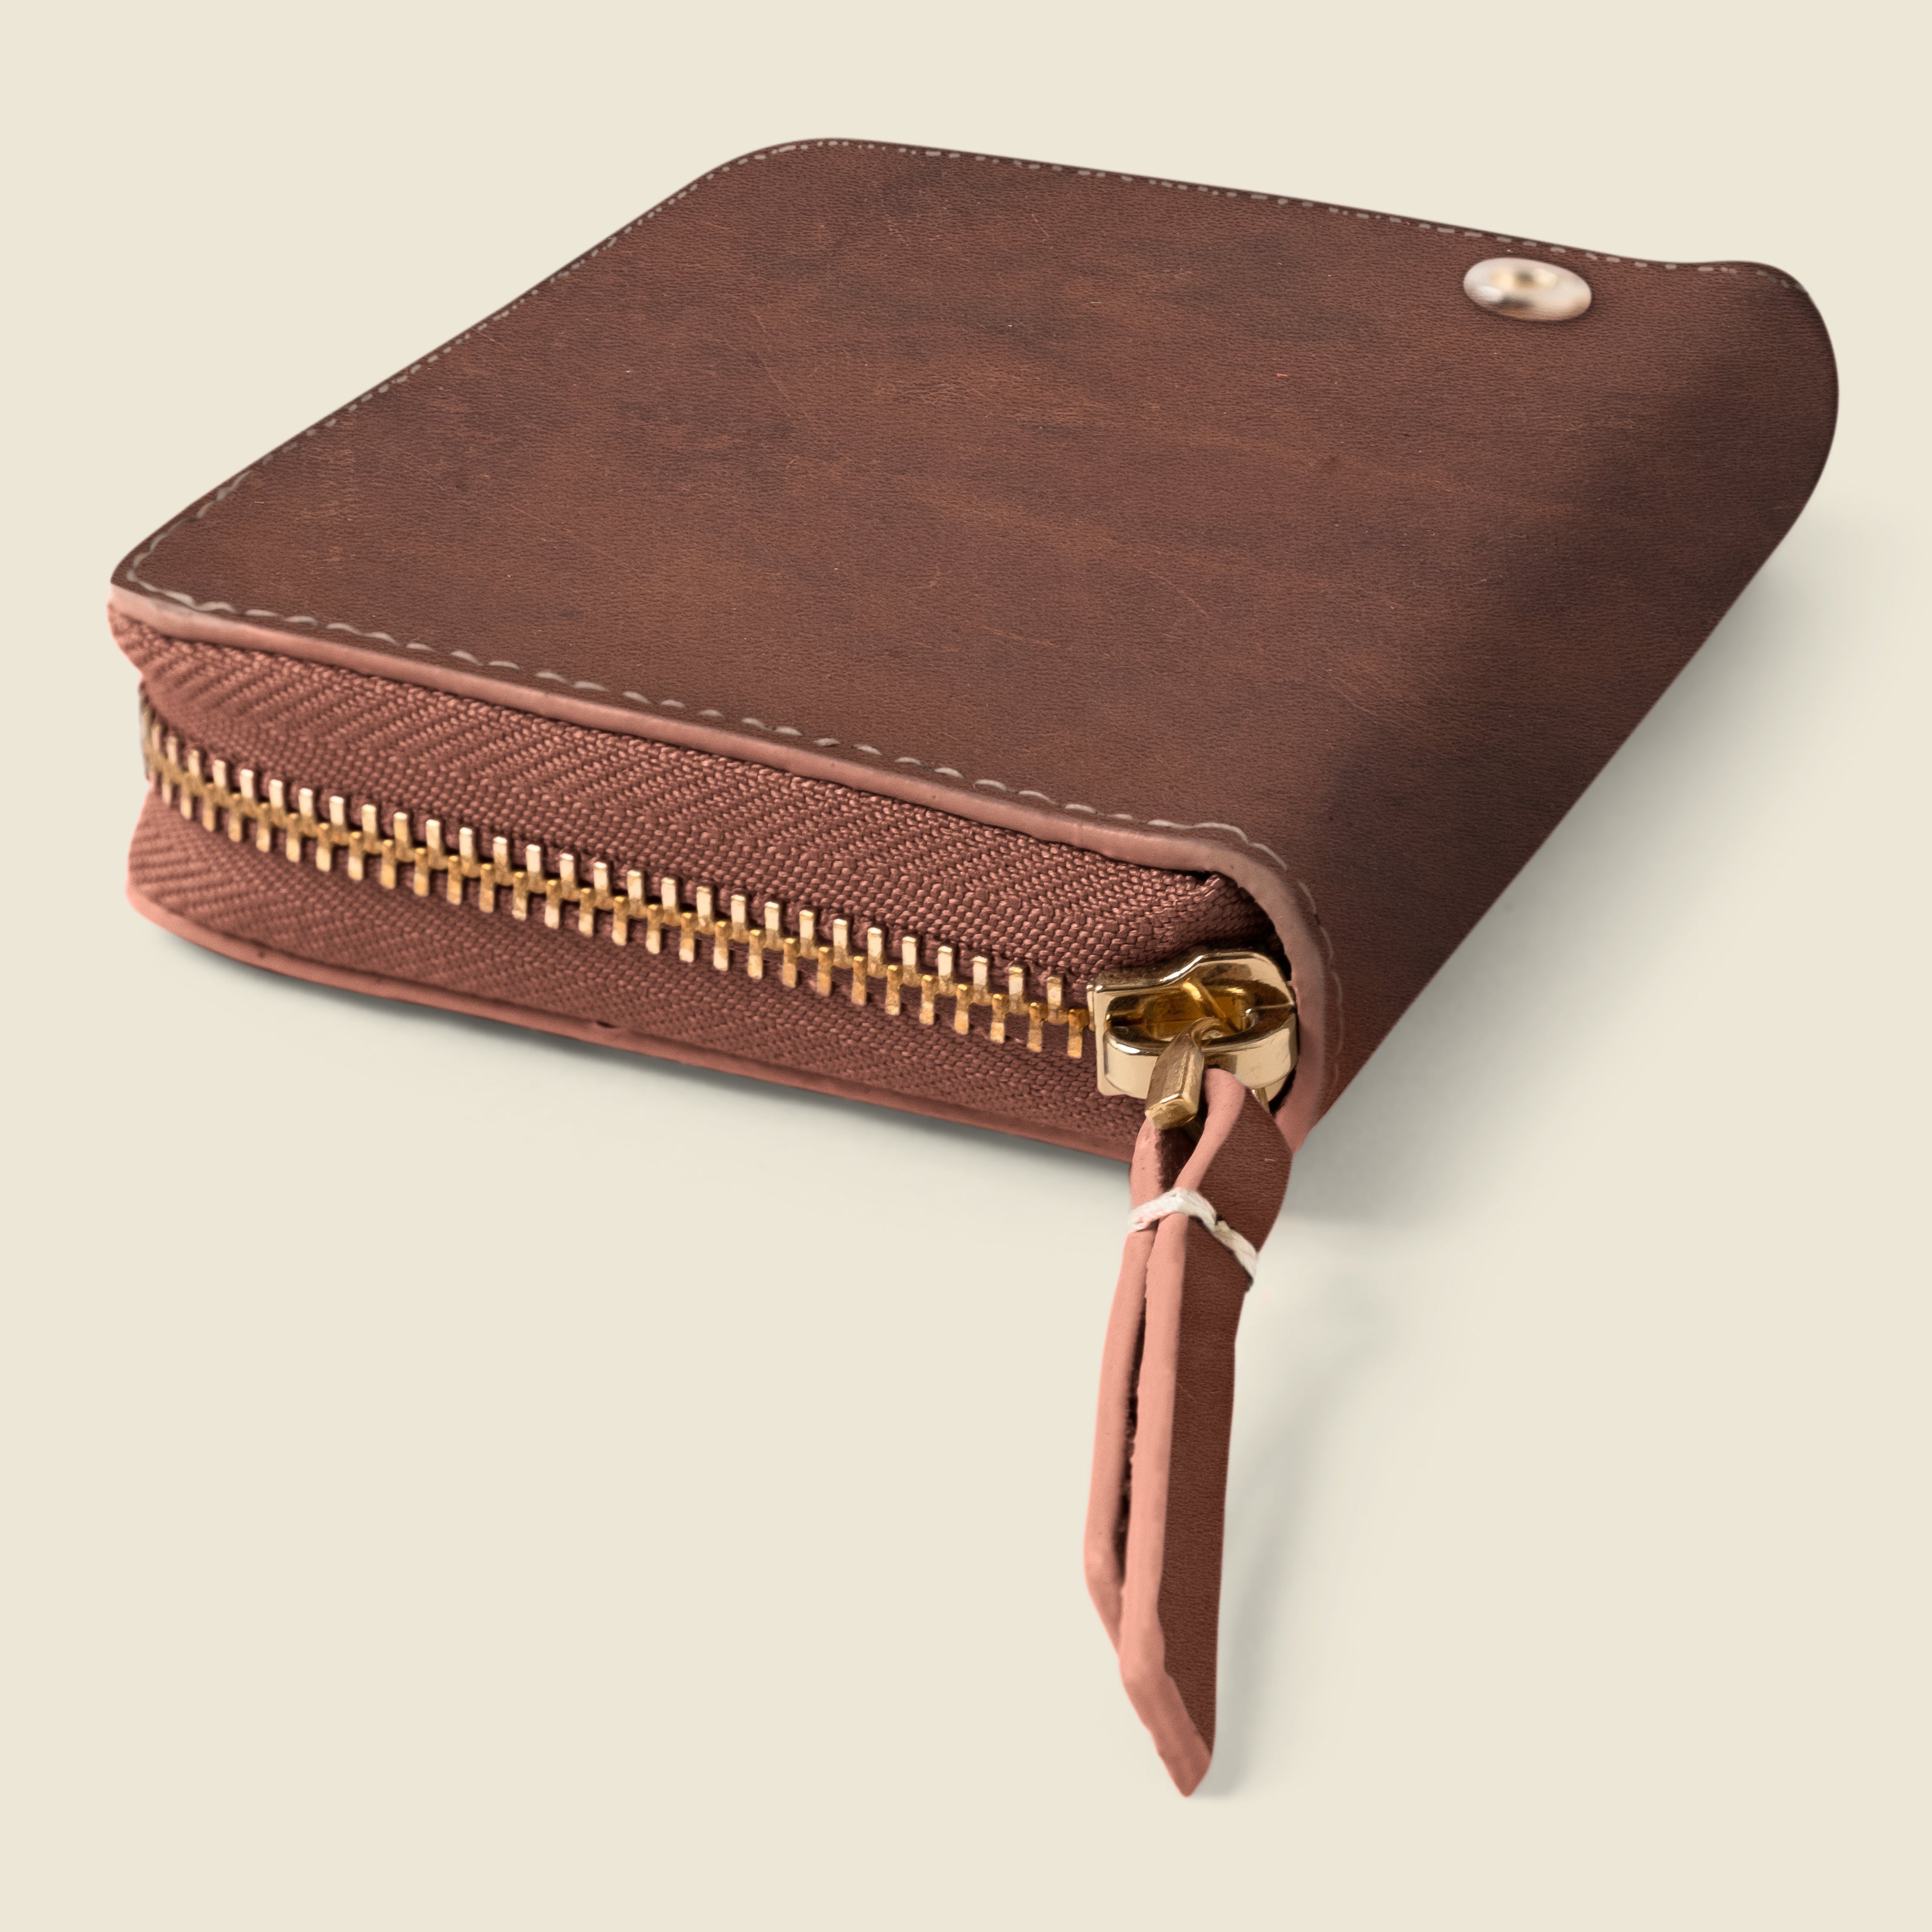 brown zipper wallet for women - corporate gifts and private label